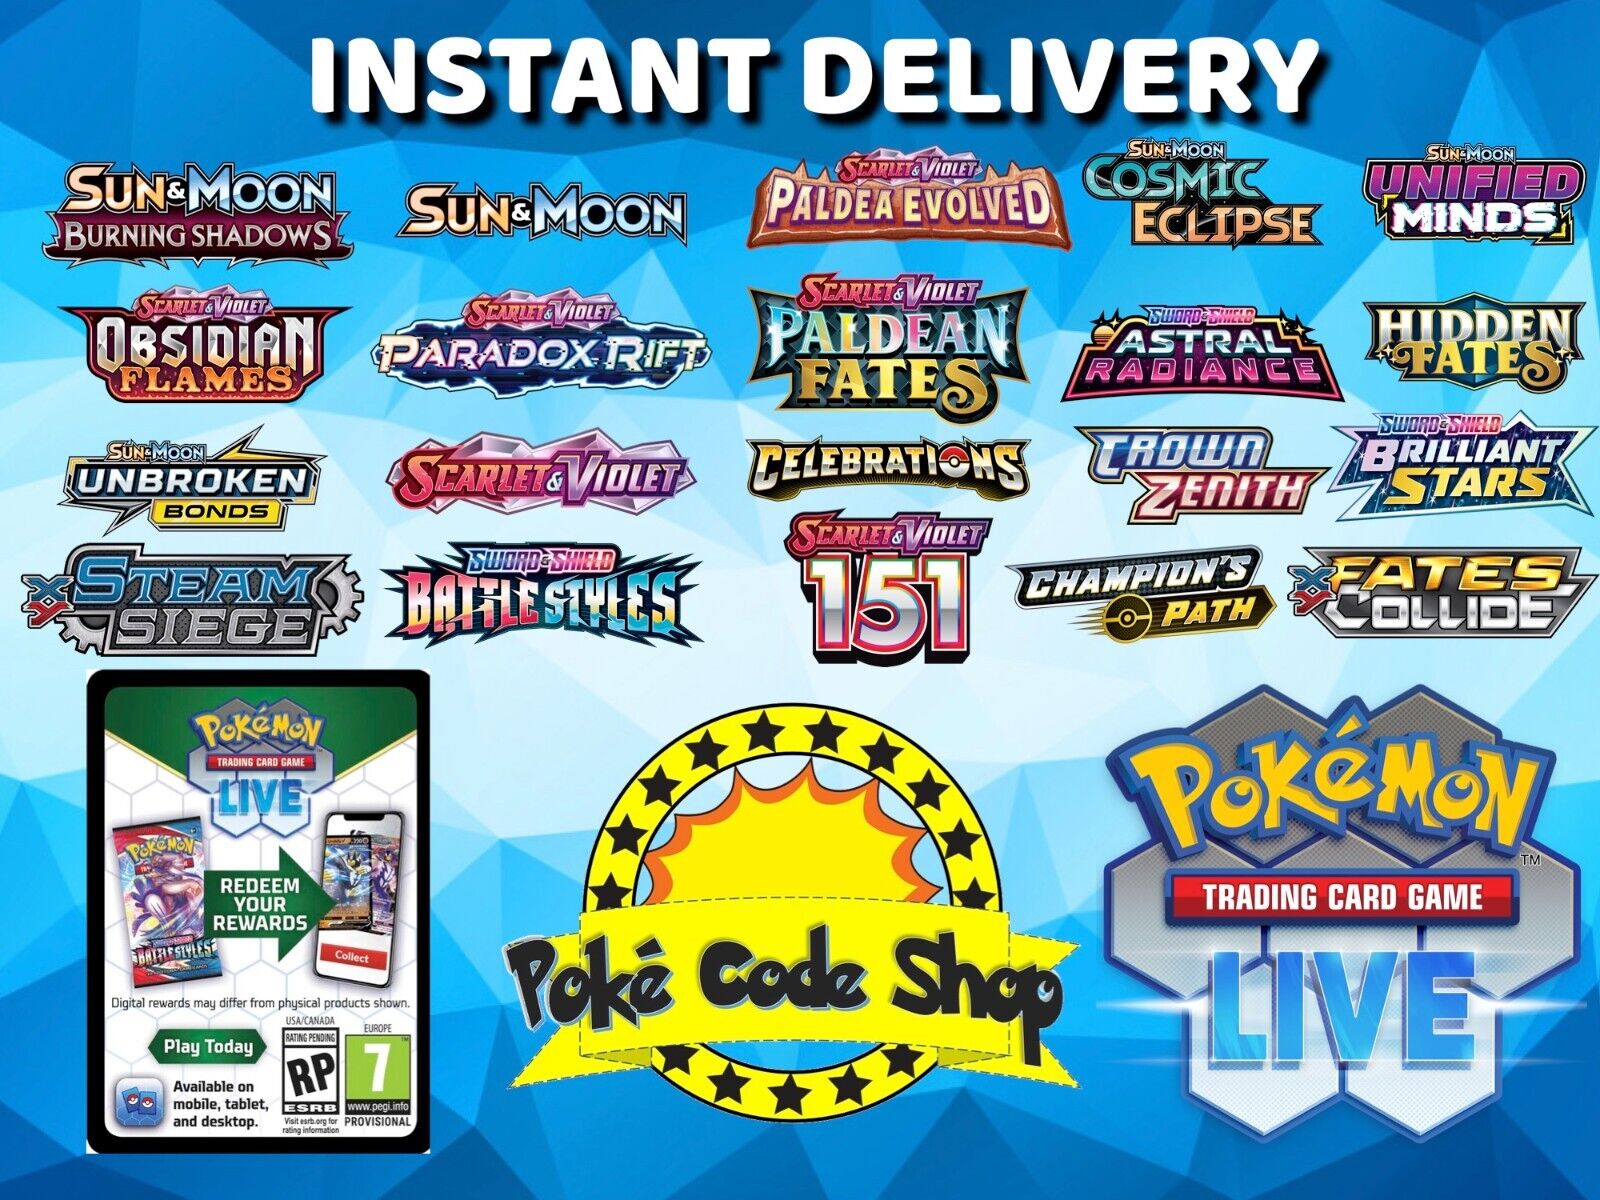 20th ANNIVERSARY / MYTHICAL COLLECTION GENERATIONS LIVE ~ Pokemon Online Codes